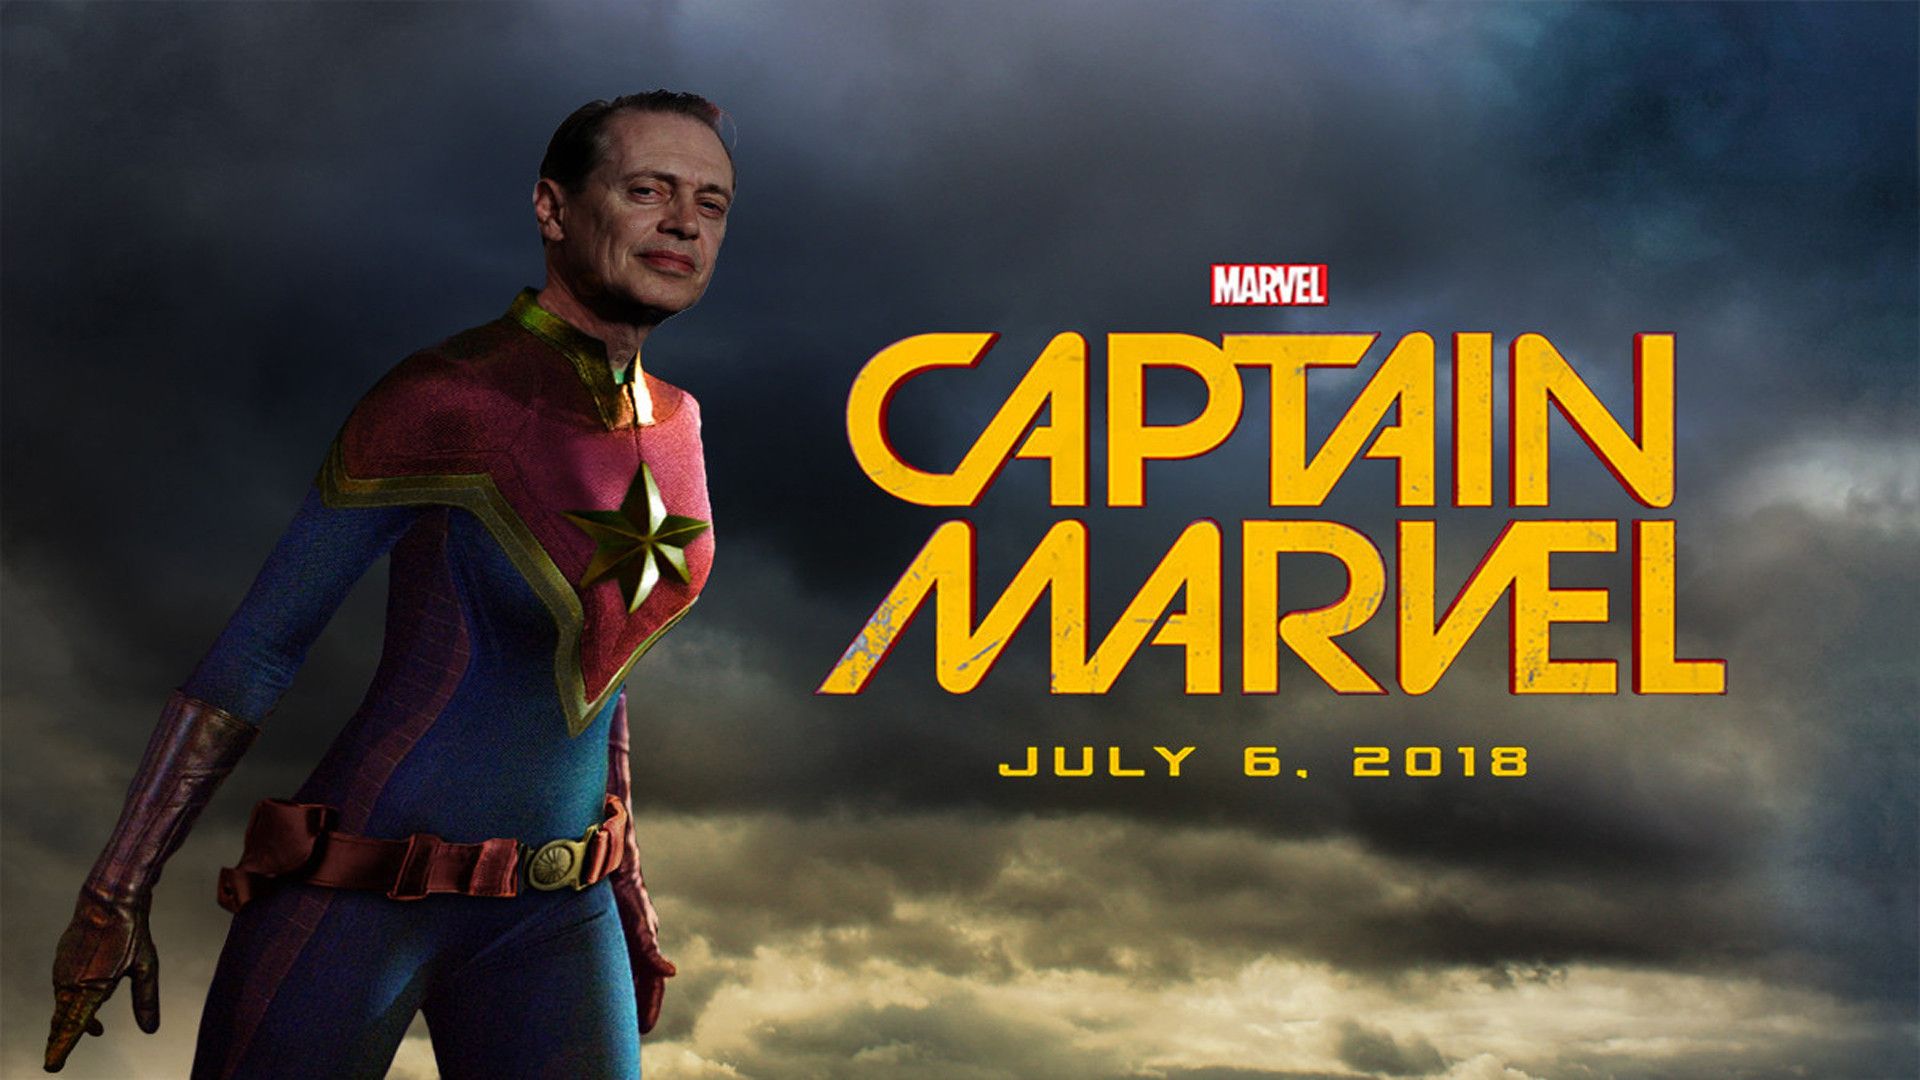 Free download Steve Buscemi as Captain Marvel A collaboration